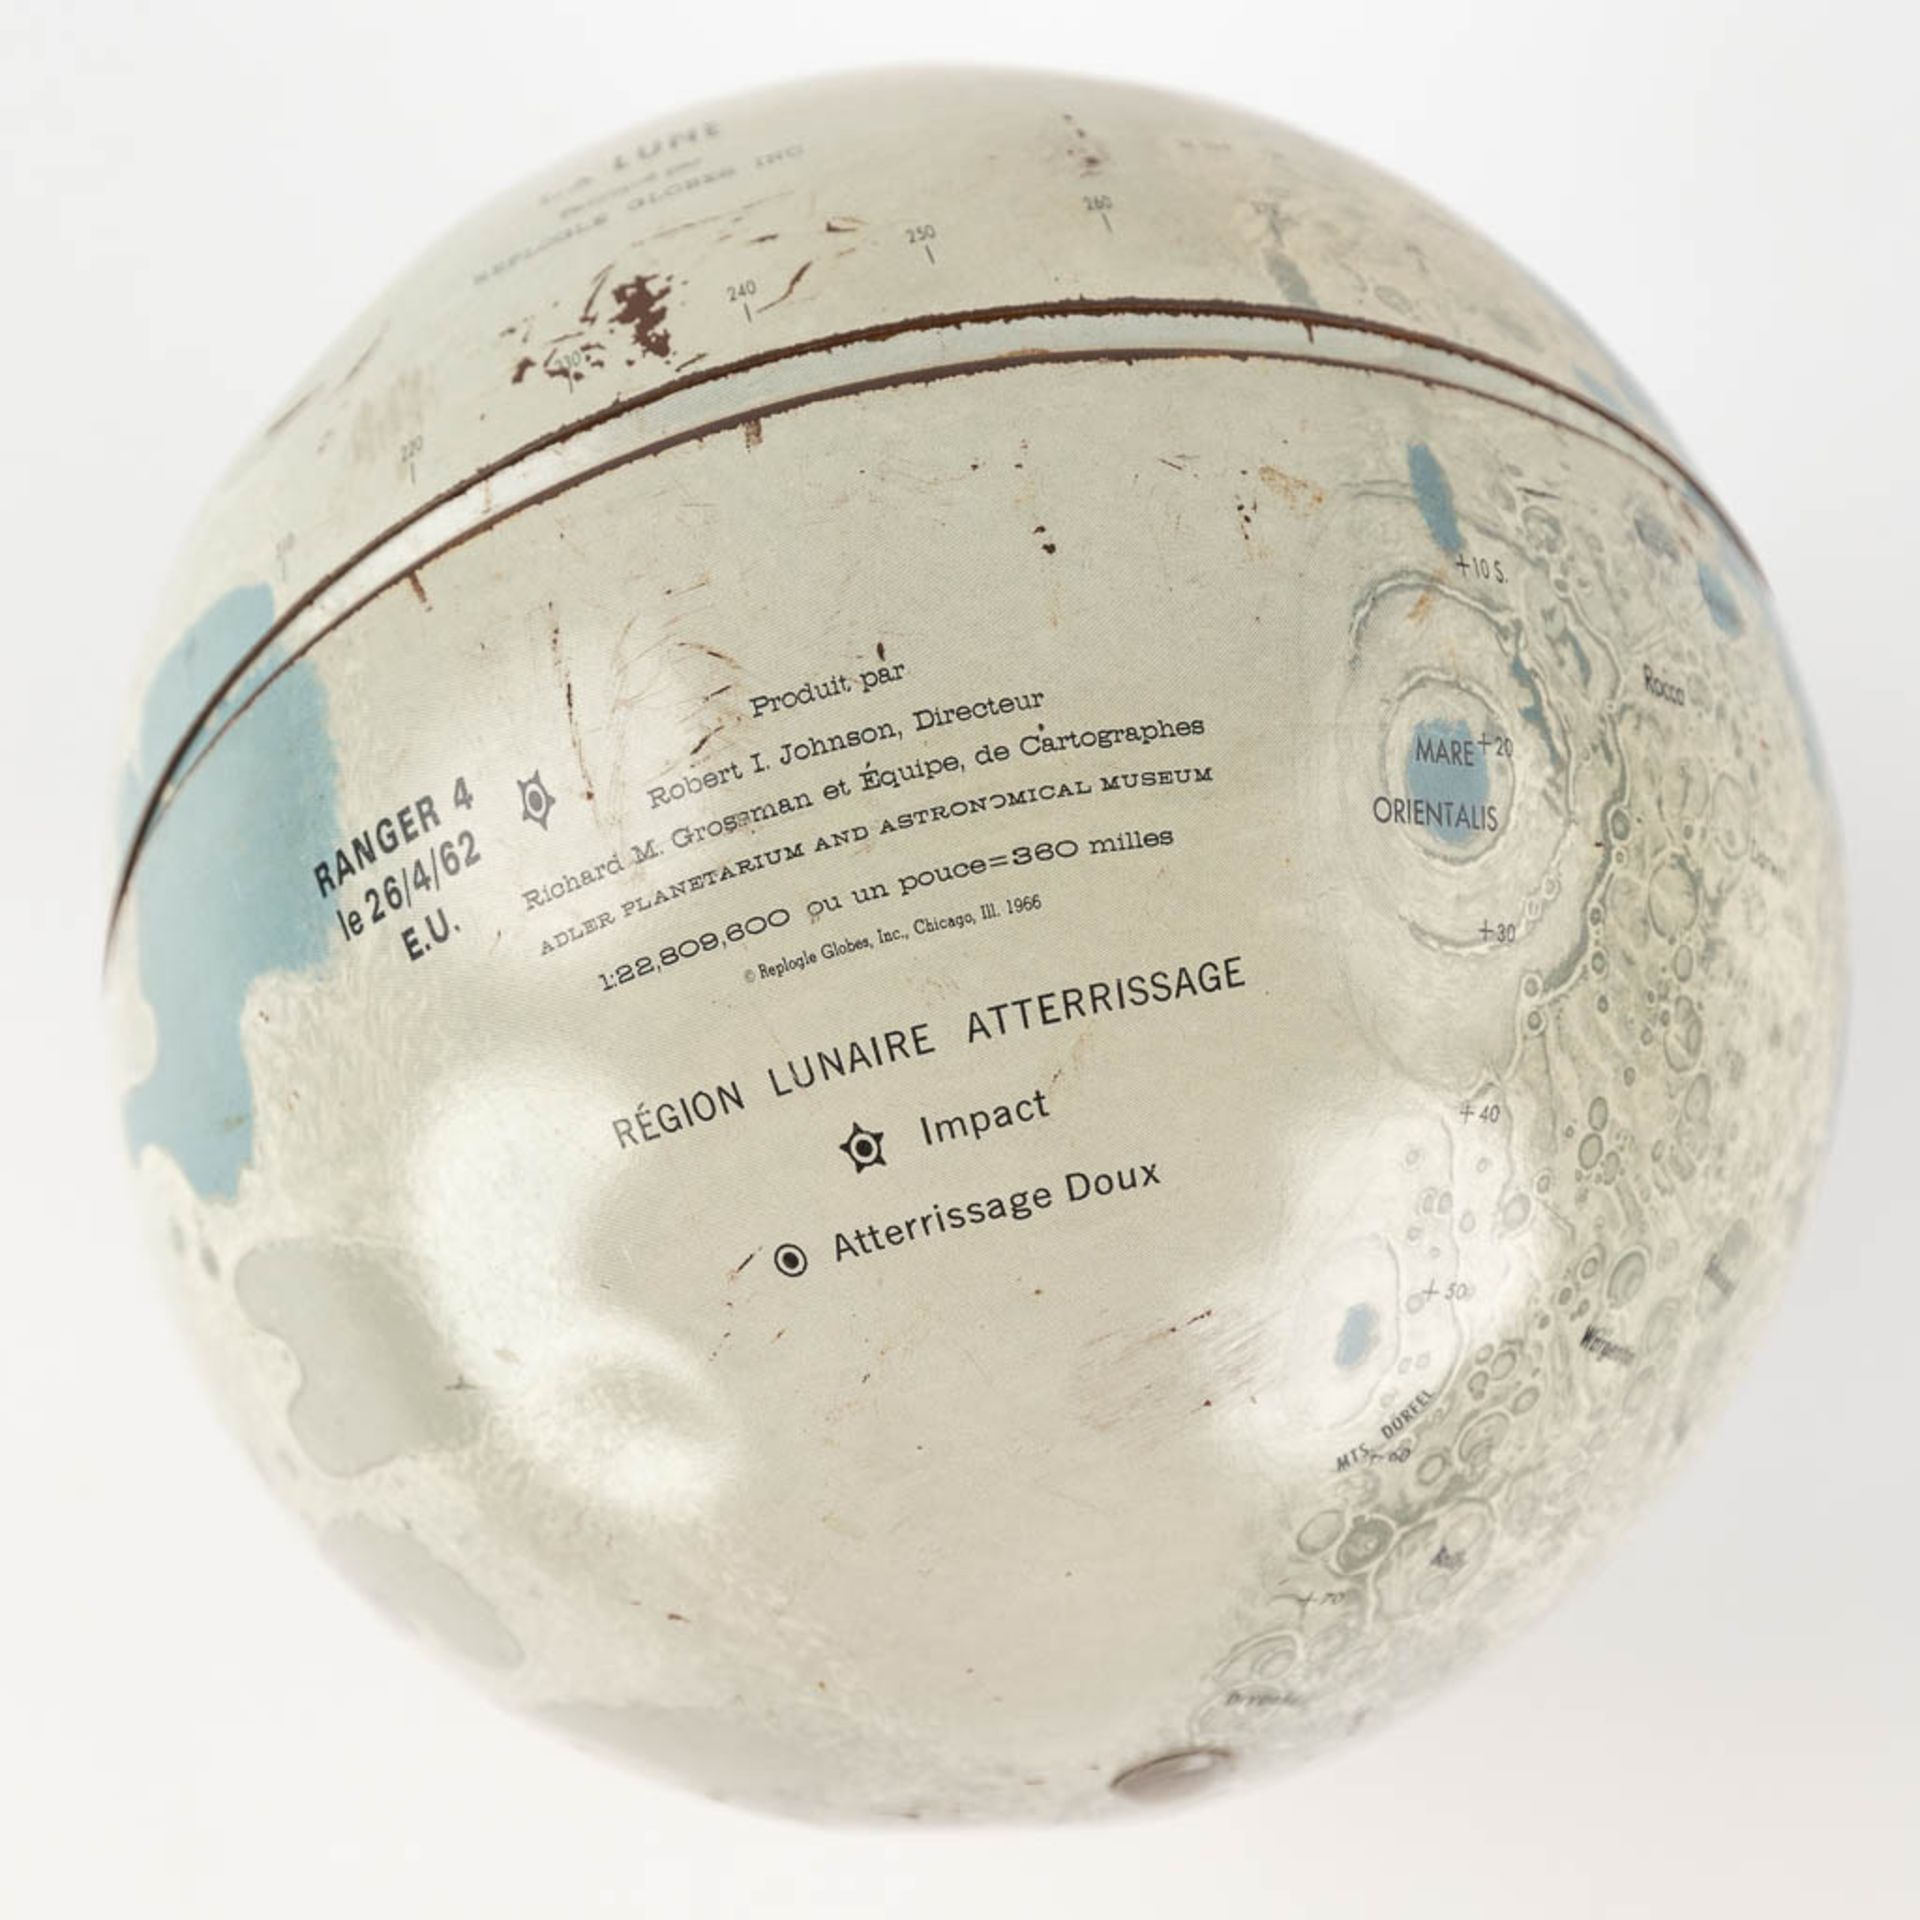 The earth and the moon, a set of 2 globes, circa 1960. (H: 42 x D: 30 cm) - Image 18 of 18